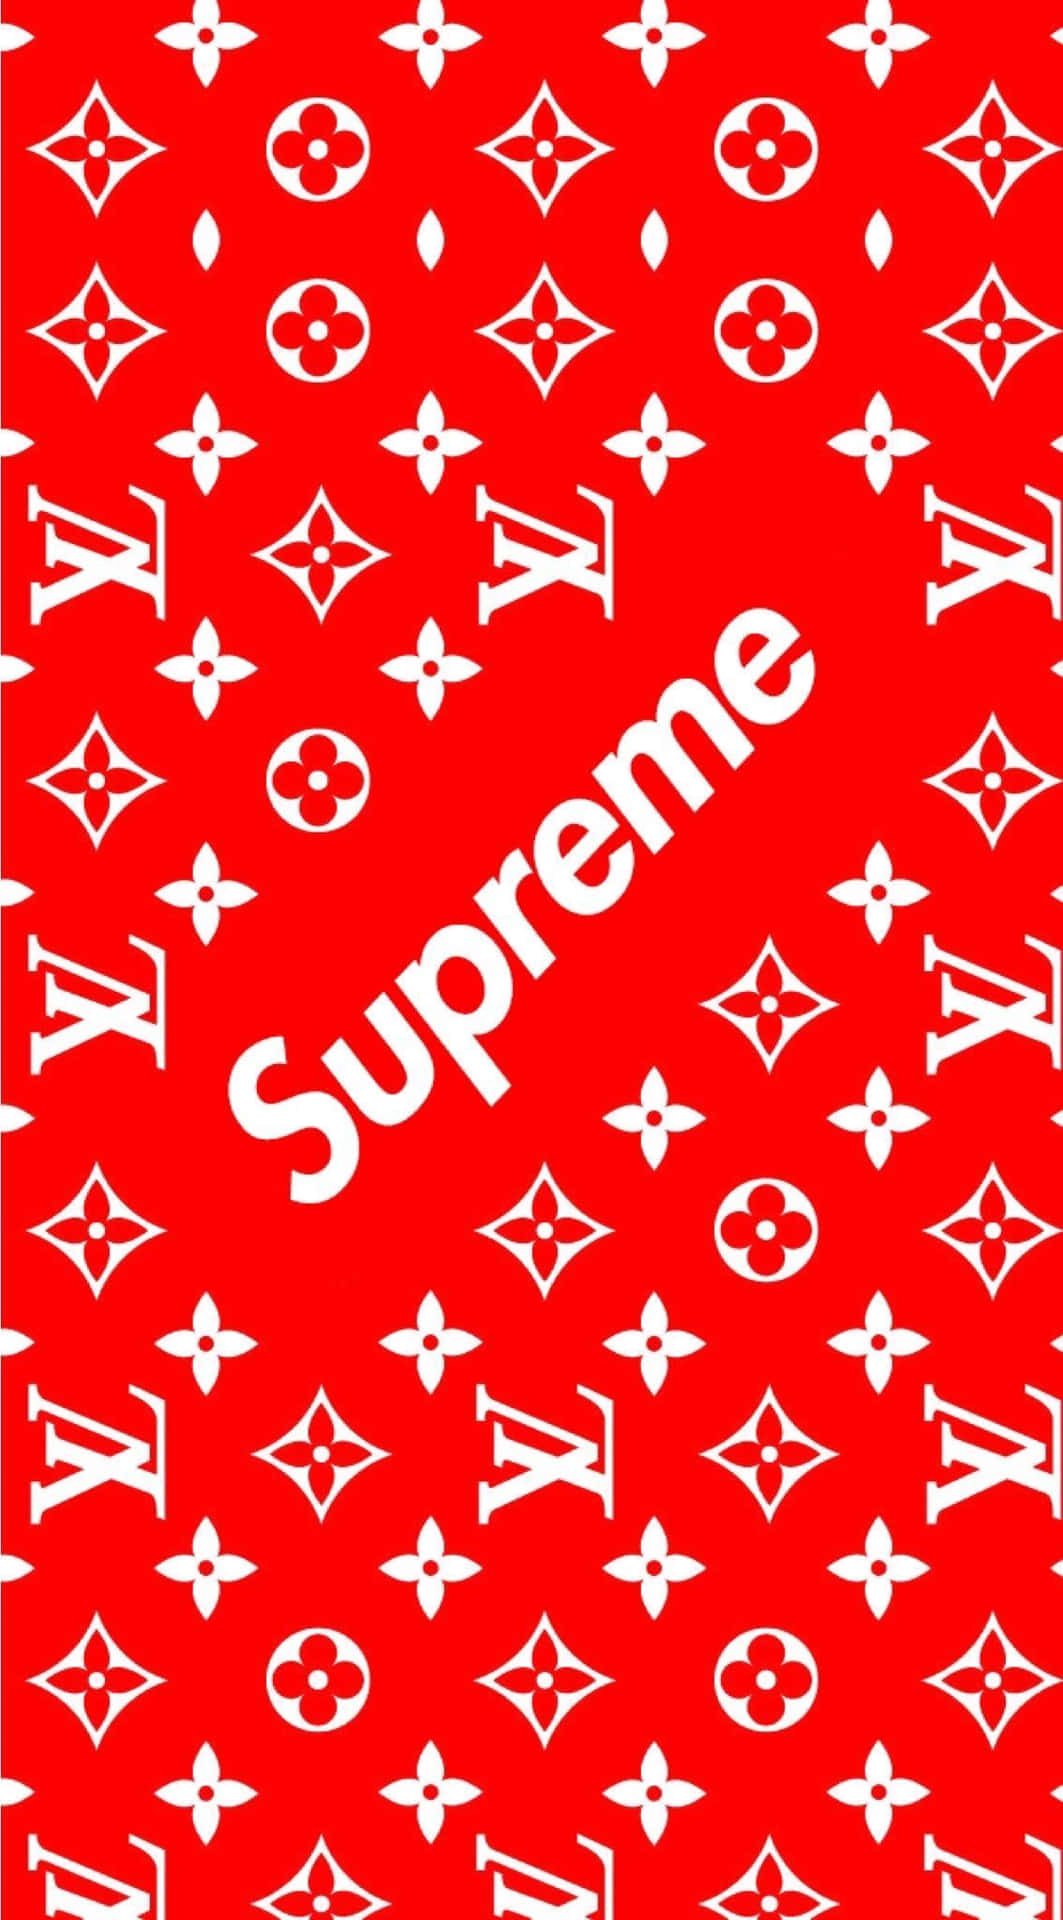 Supreme logo on a textured background Wallpaper